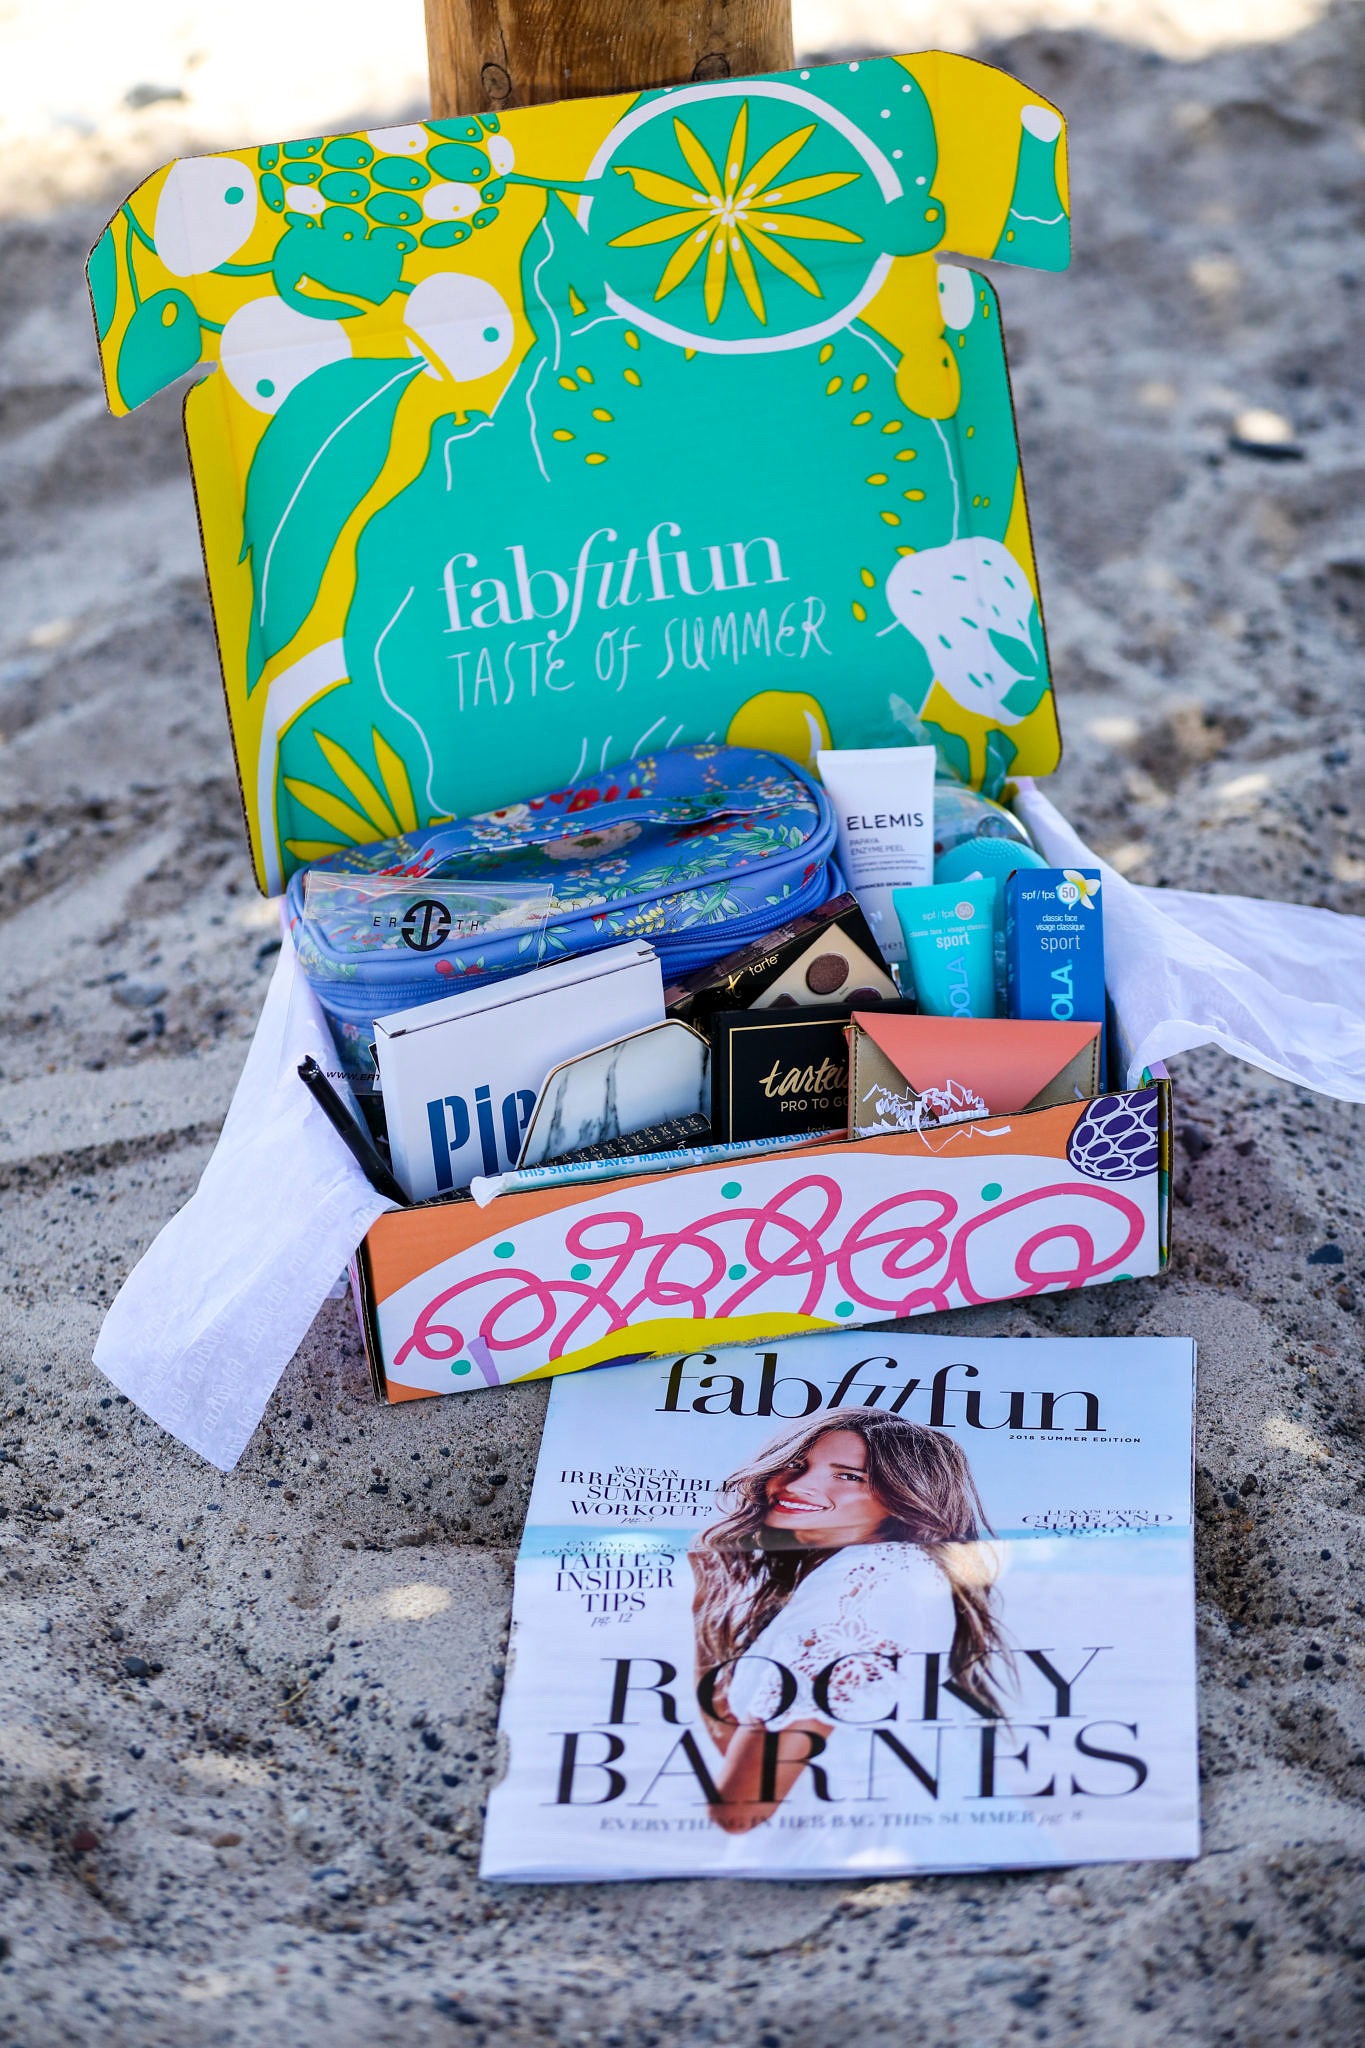 Bookmark this post ASAP! Orange County Blogger Debbie Savage is breaking down exactly what is in the FabFitFun Summer 2018 box and why you need it ASAP! 